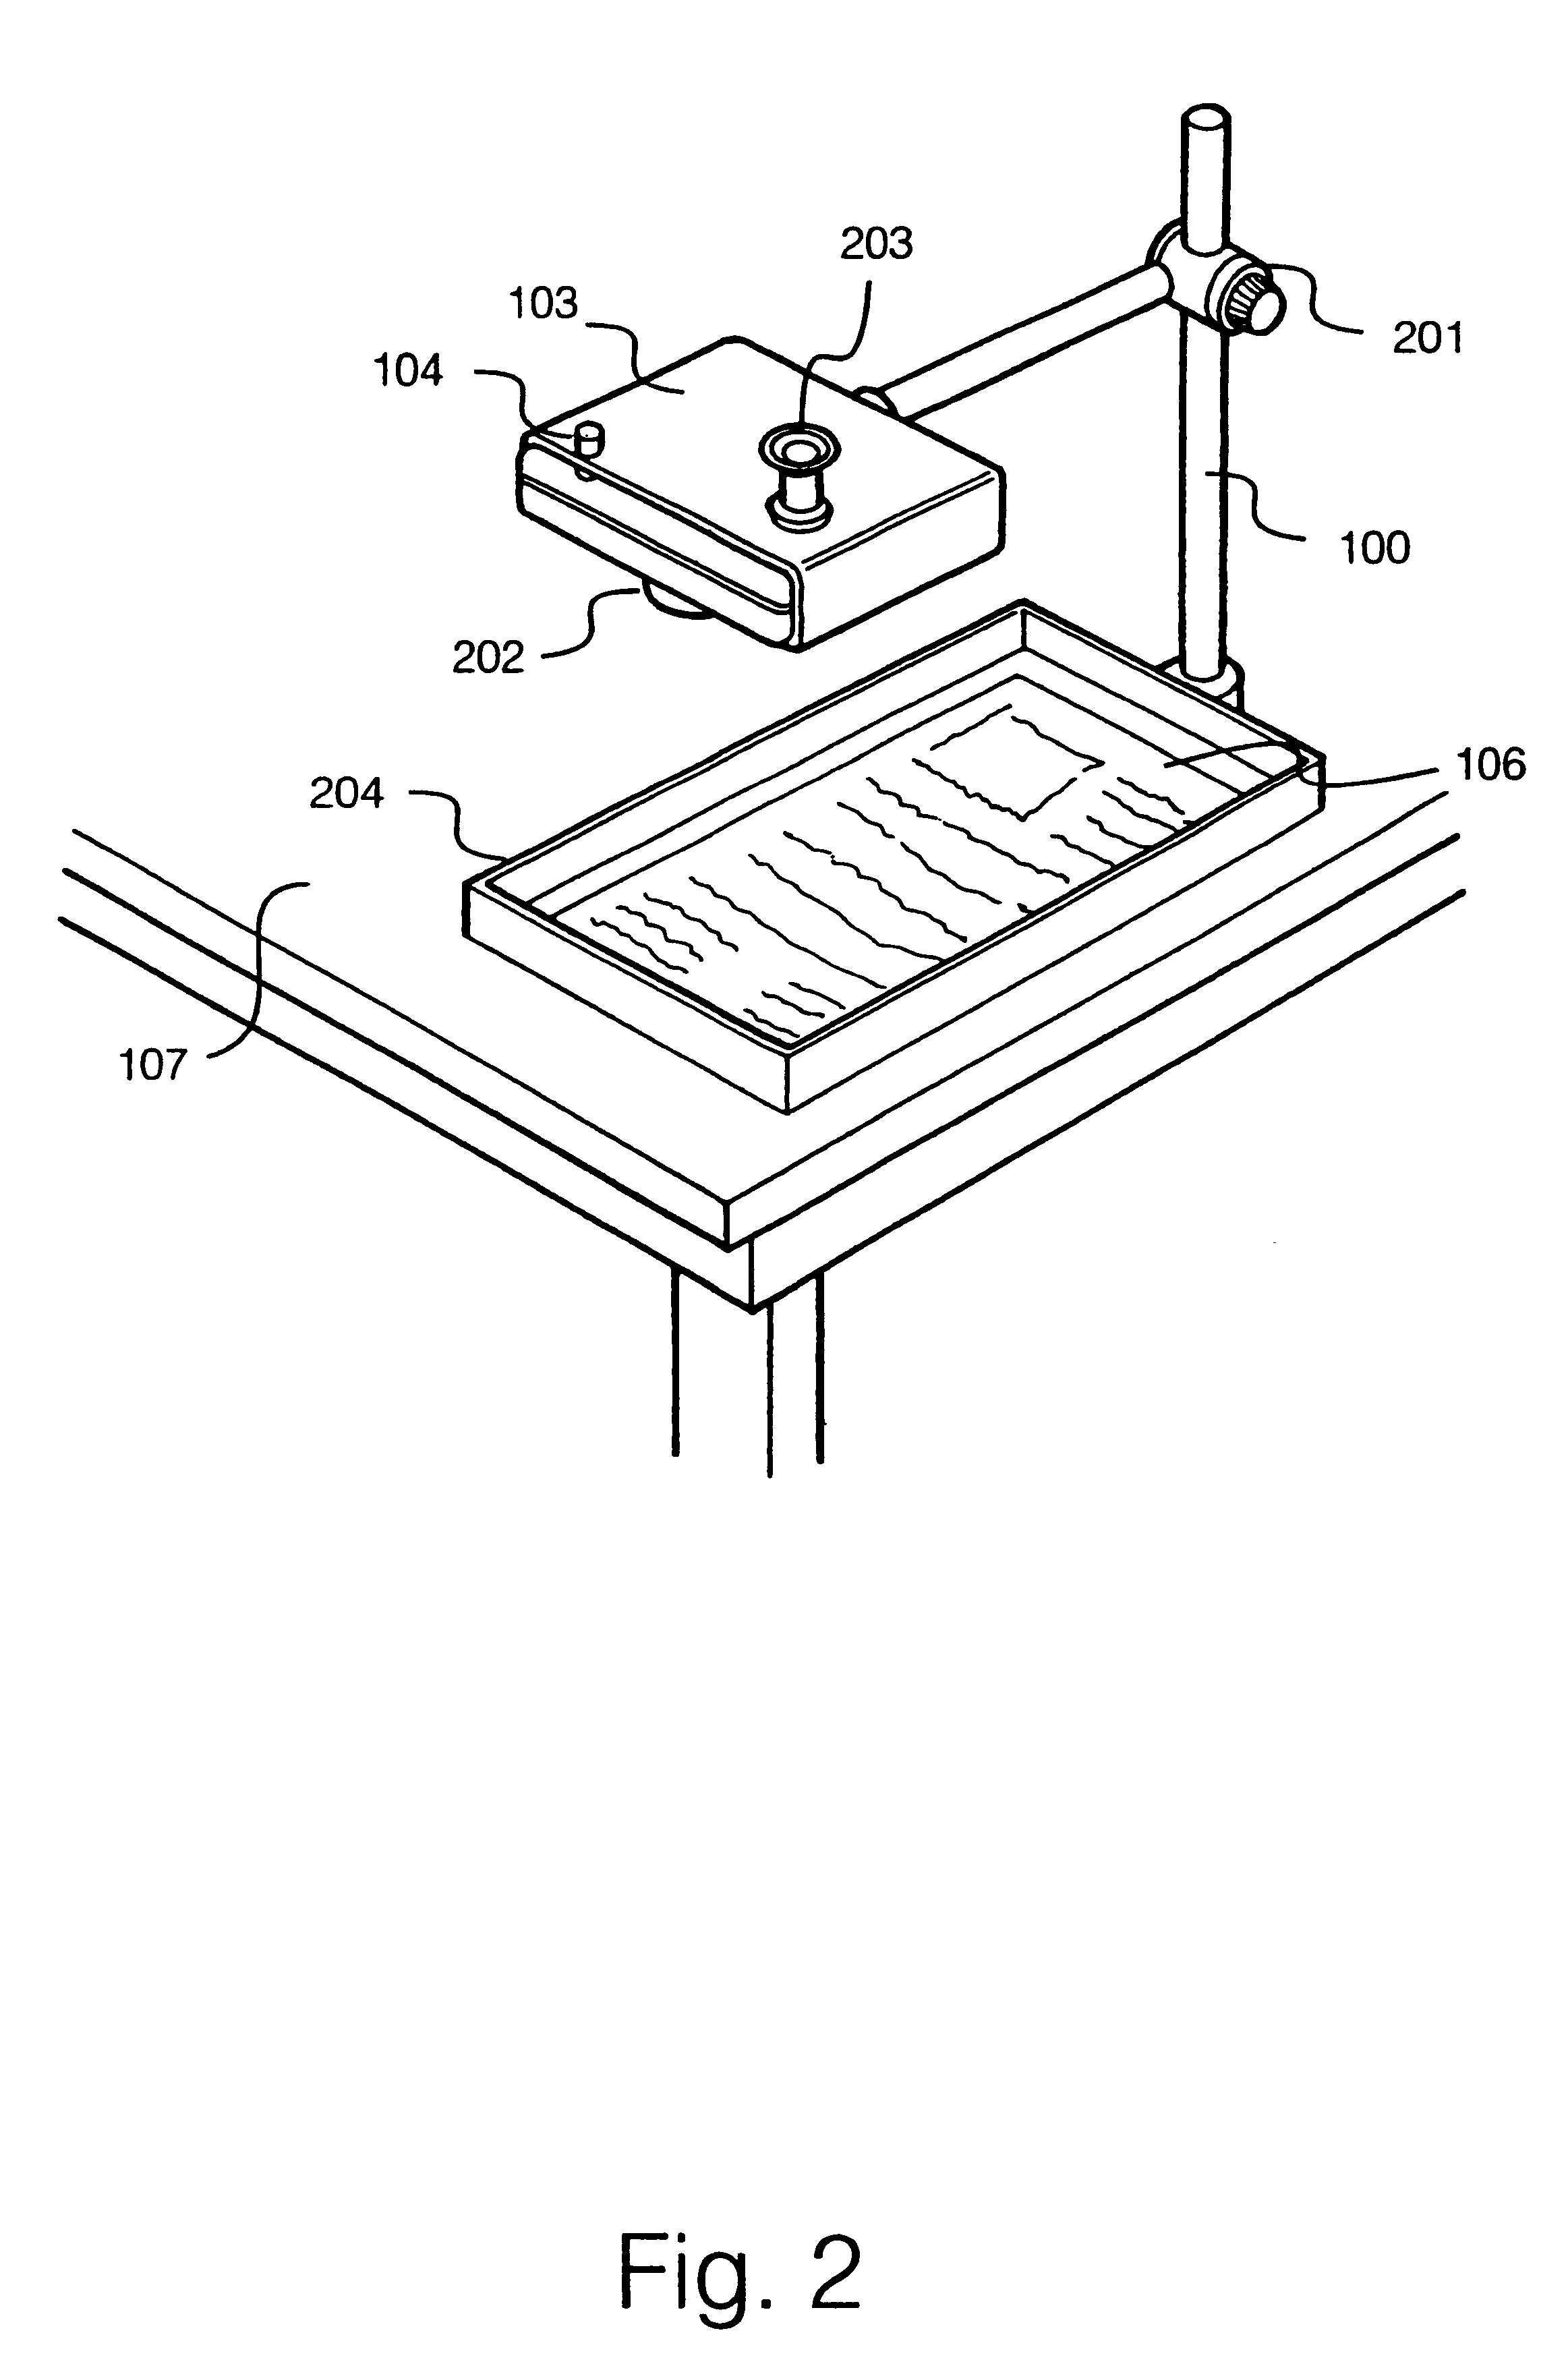 Document capture stand